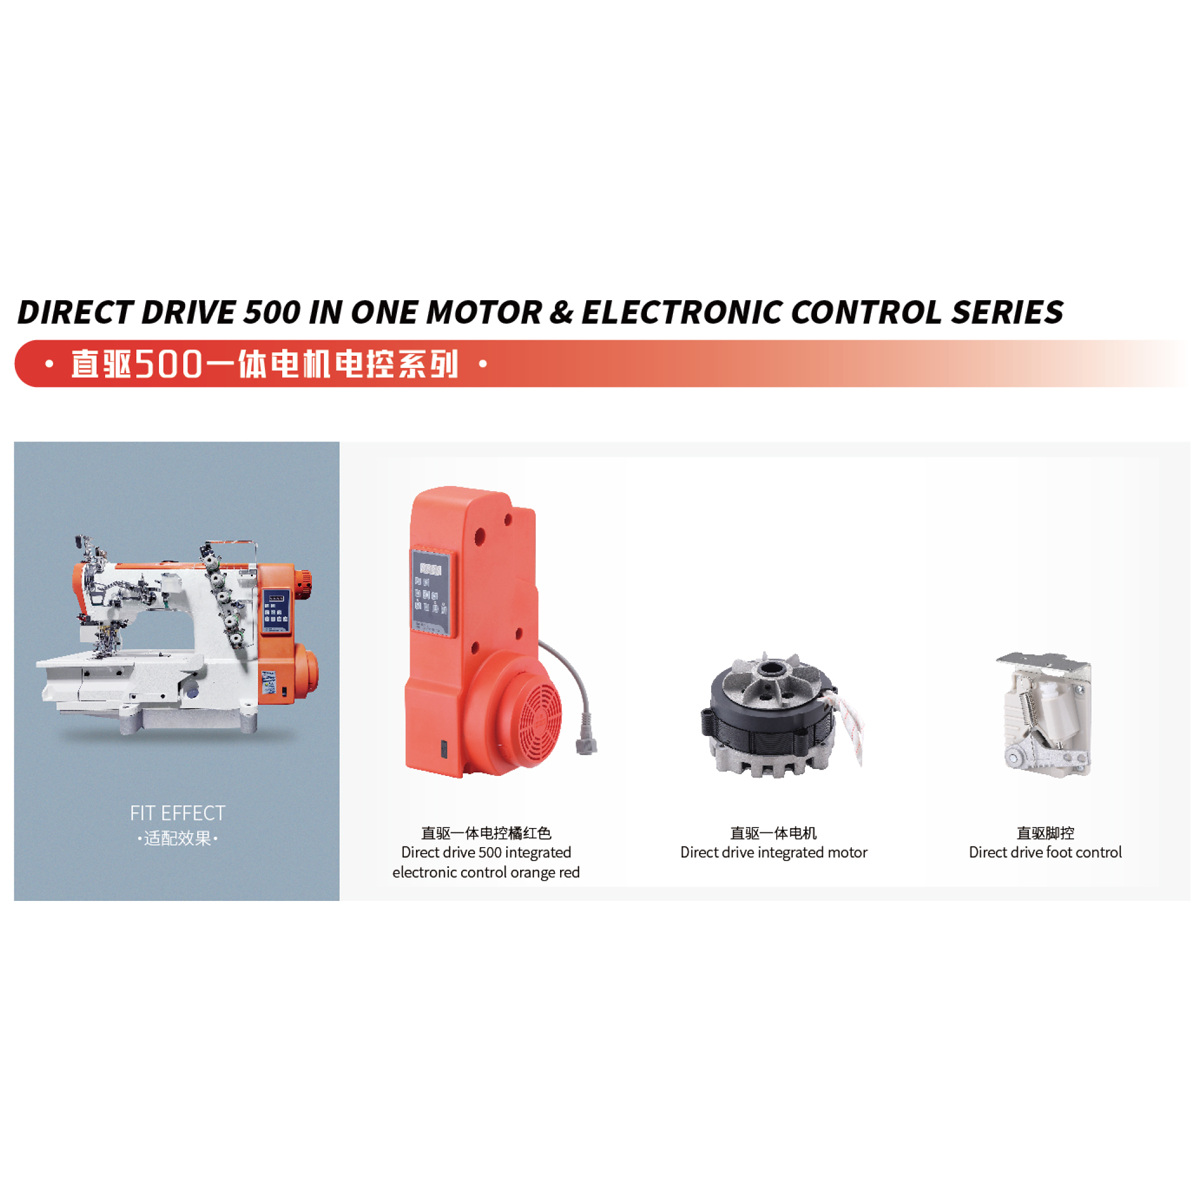 DIRECT DRIVE 500 IN ONE MOTOR & ELECTRONIC CONTROL SERIES